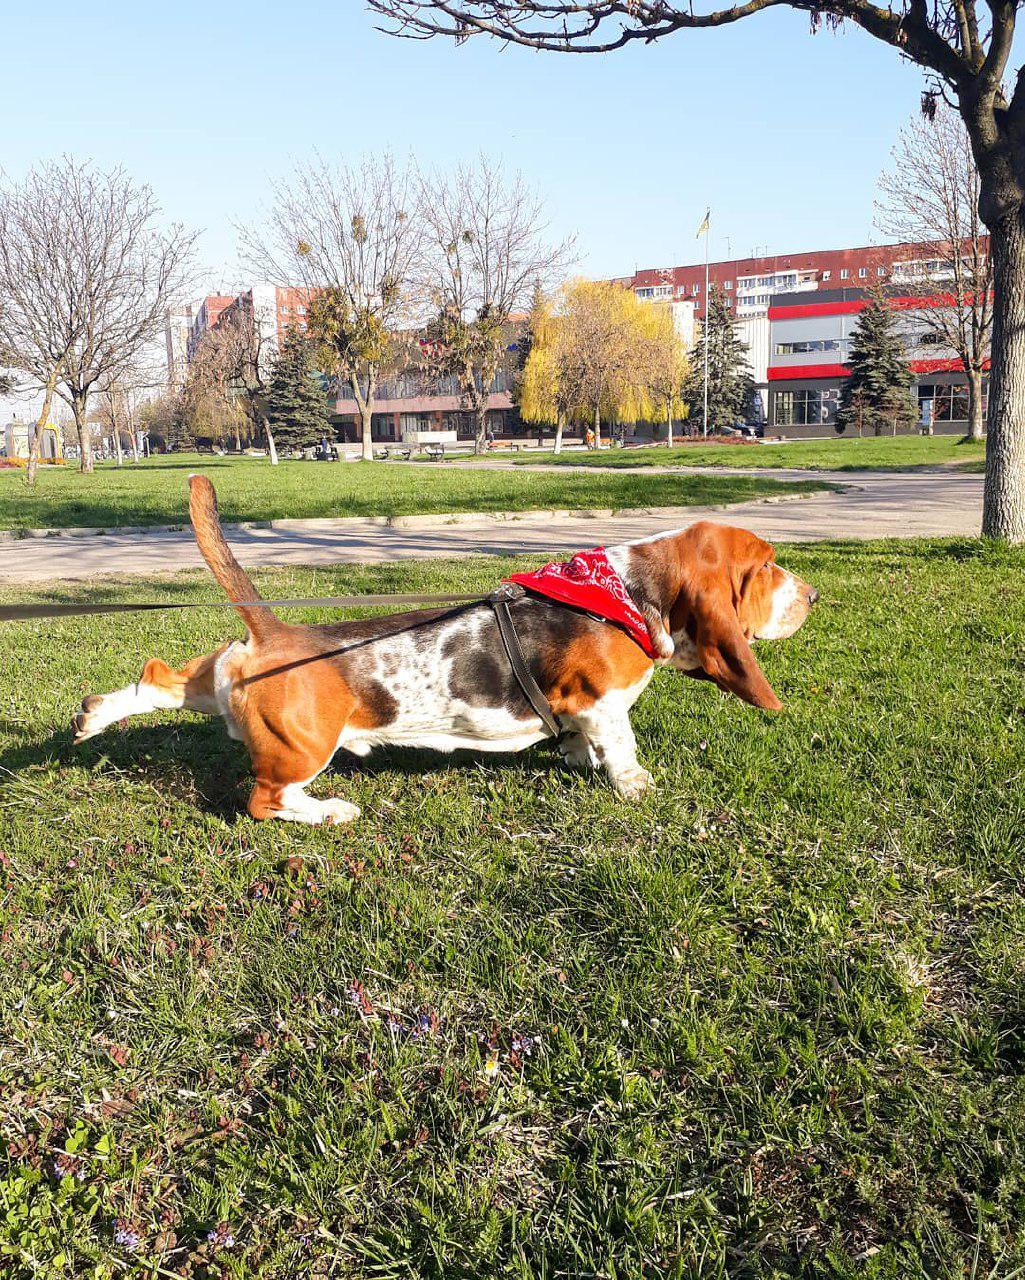 A Basset Hound standing on the grass at the park